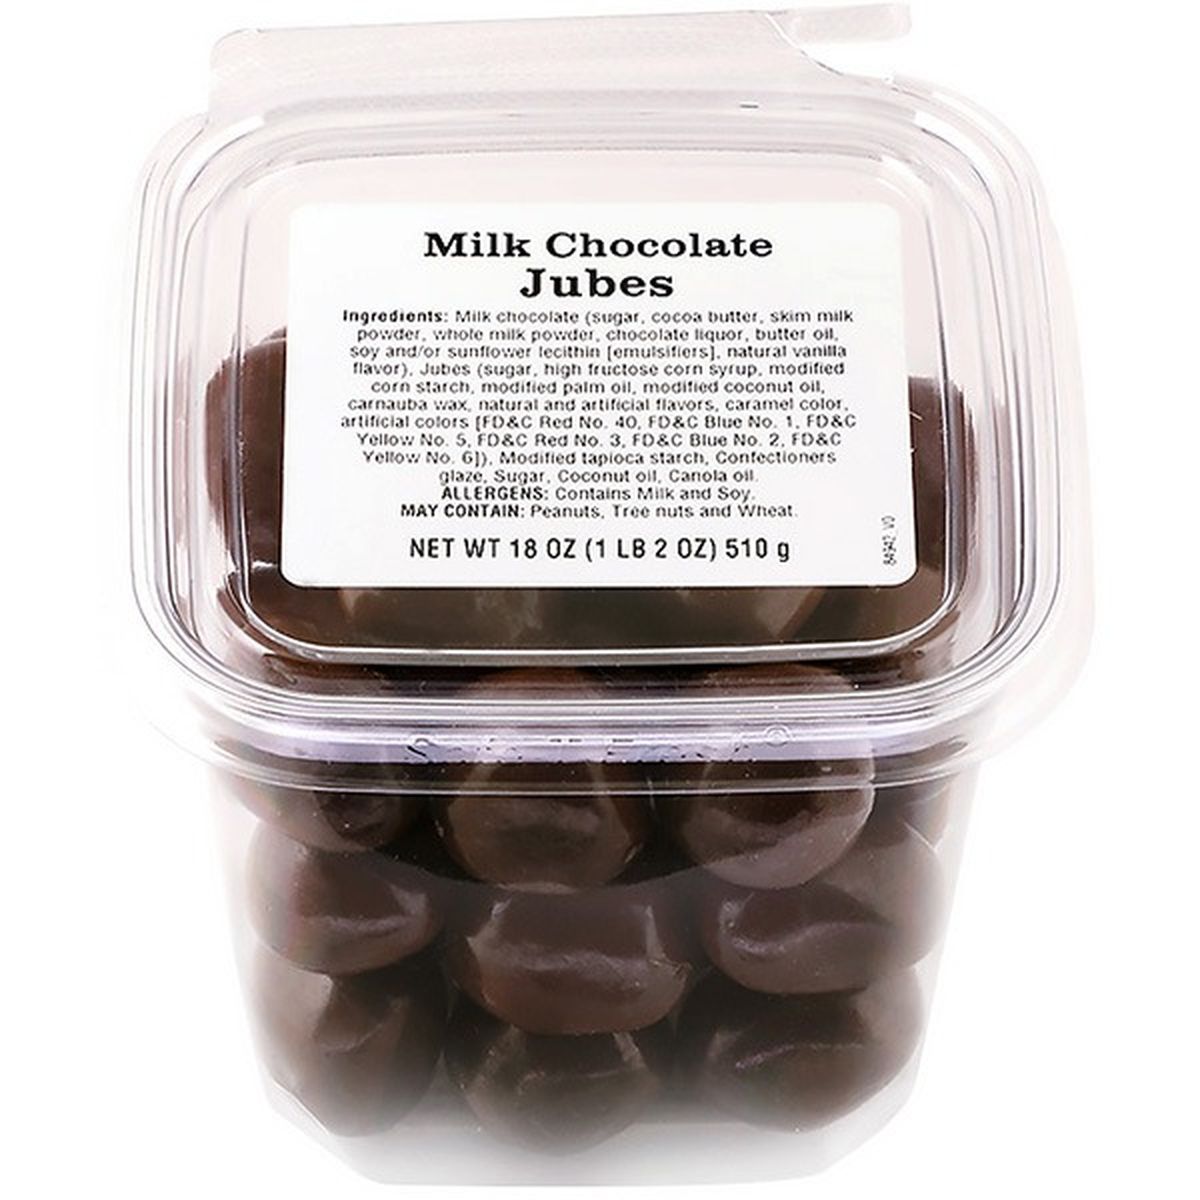 Calories in Johnvince Foods Milk Chocolate Jubes Tub